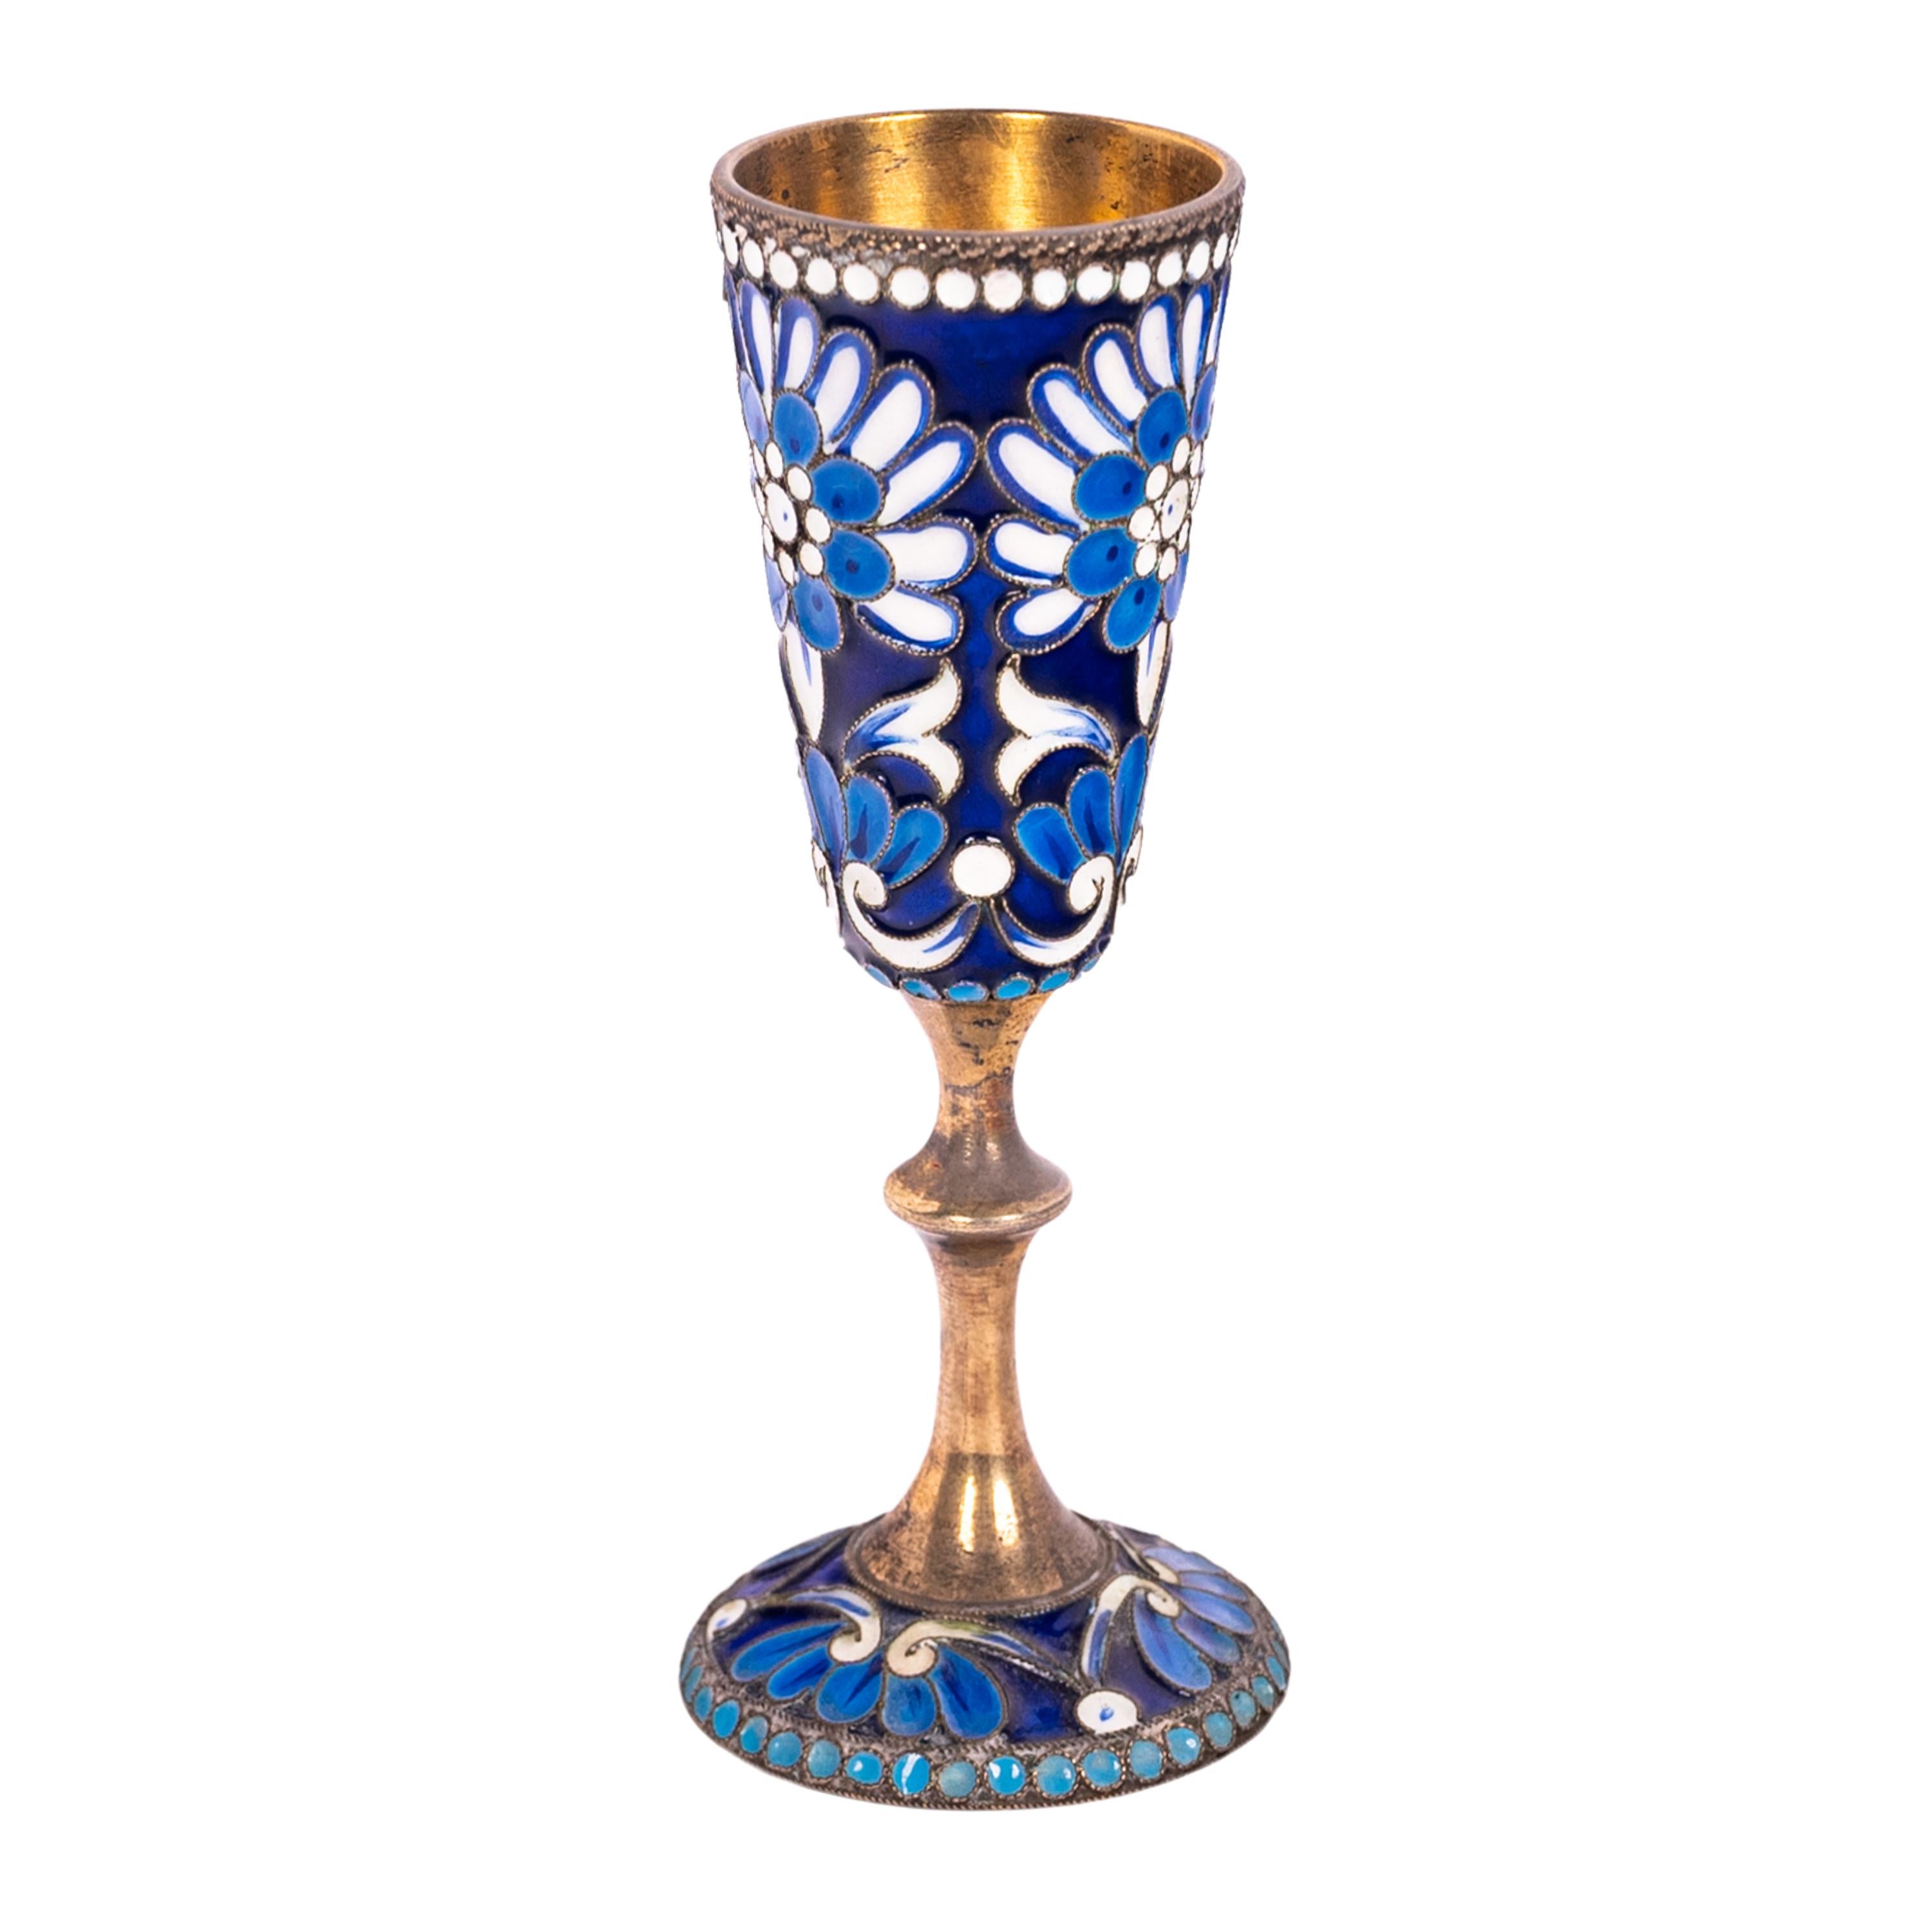 A good antique silver-gilt cloisonné Russian Imperial vodka glass/goblet, St. Petersburg, circa 1900. 
The goblet with a cobalt blue ground having a lighter blue & white floral decoration and raised on a turned silver-gilt stem with a flared foot